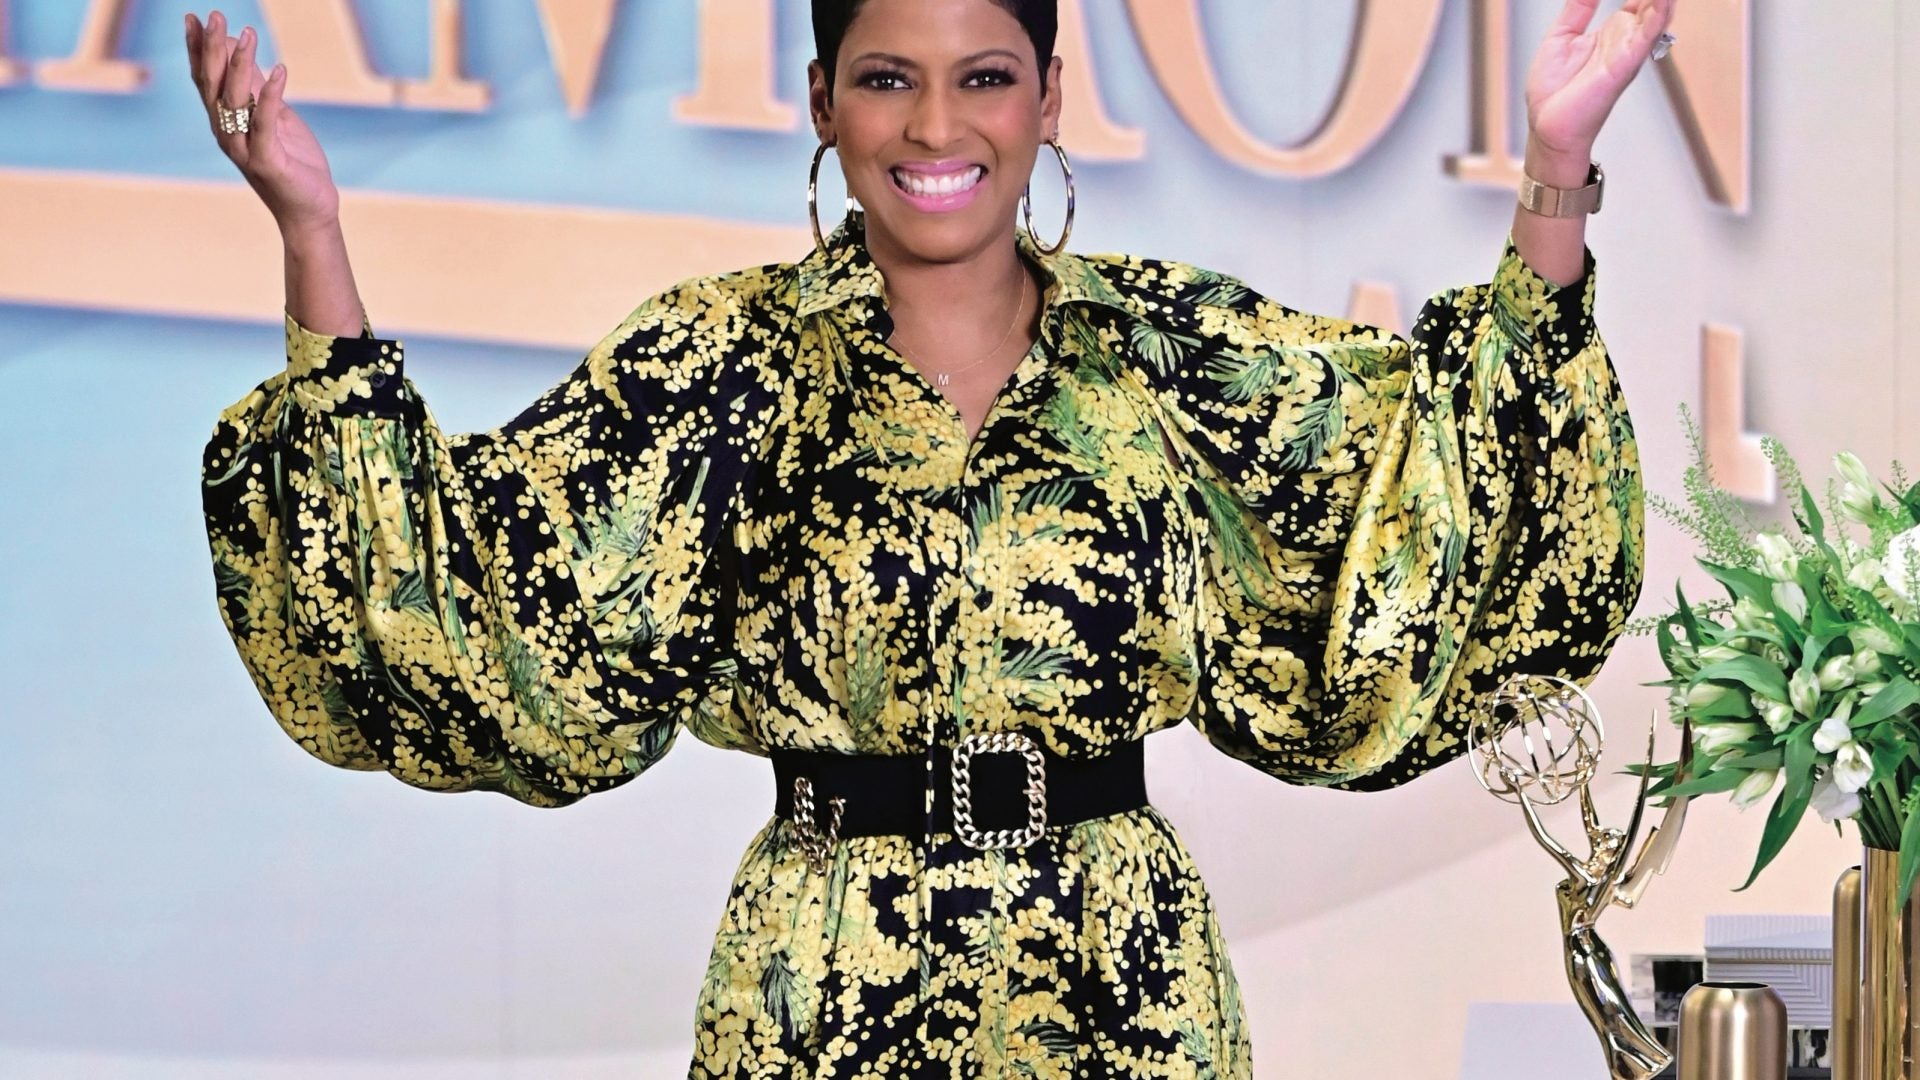 Tamron Hall’s Heartfelt Plea To Black Women Who Are Victims Of Domestic Violence and Afraid